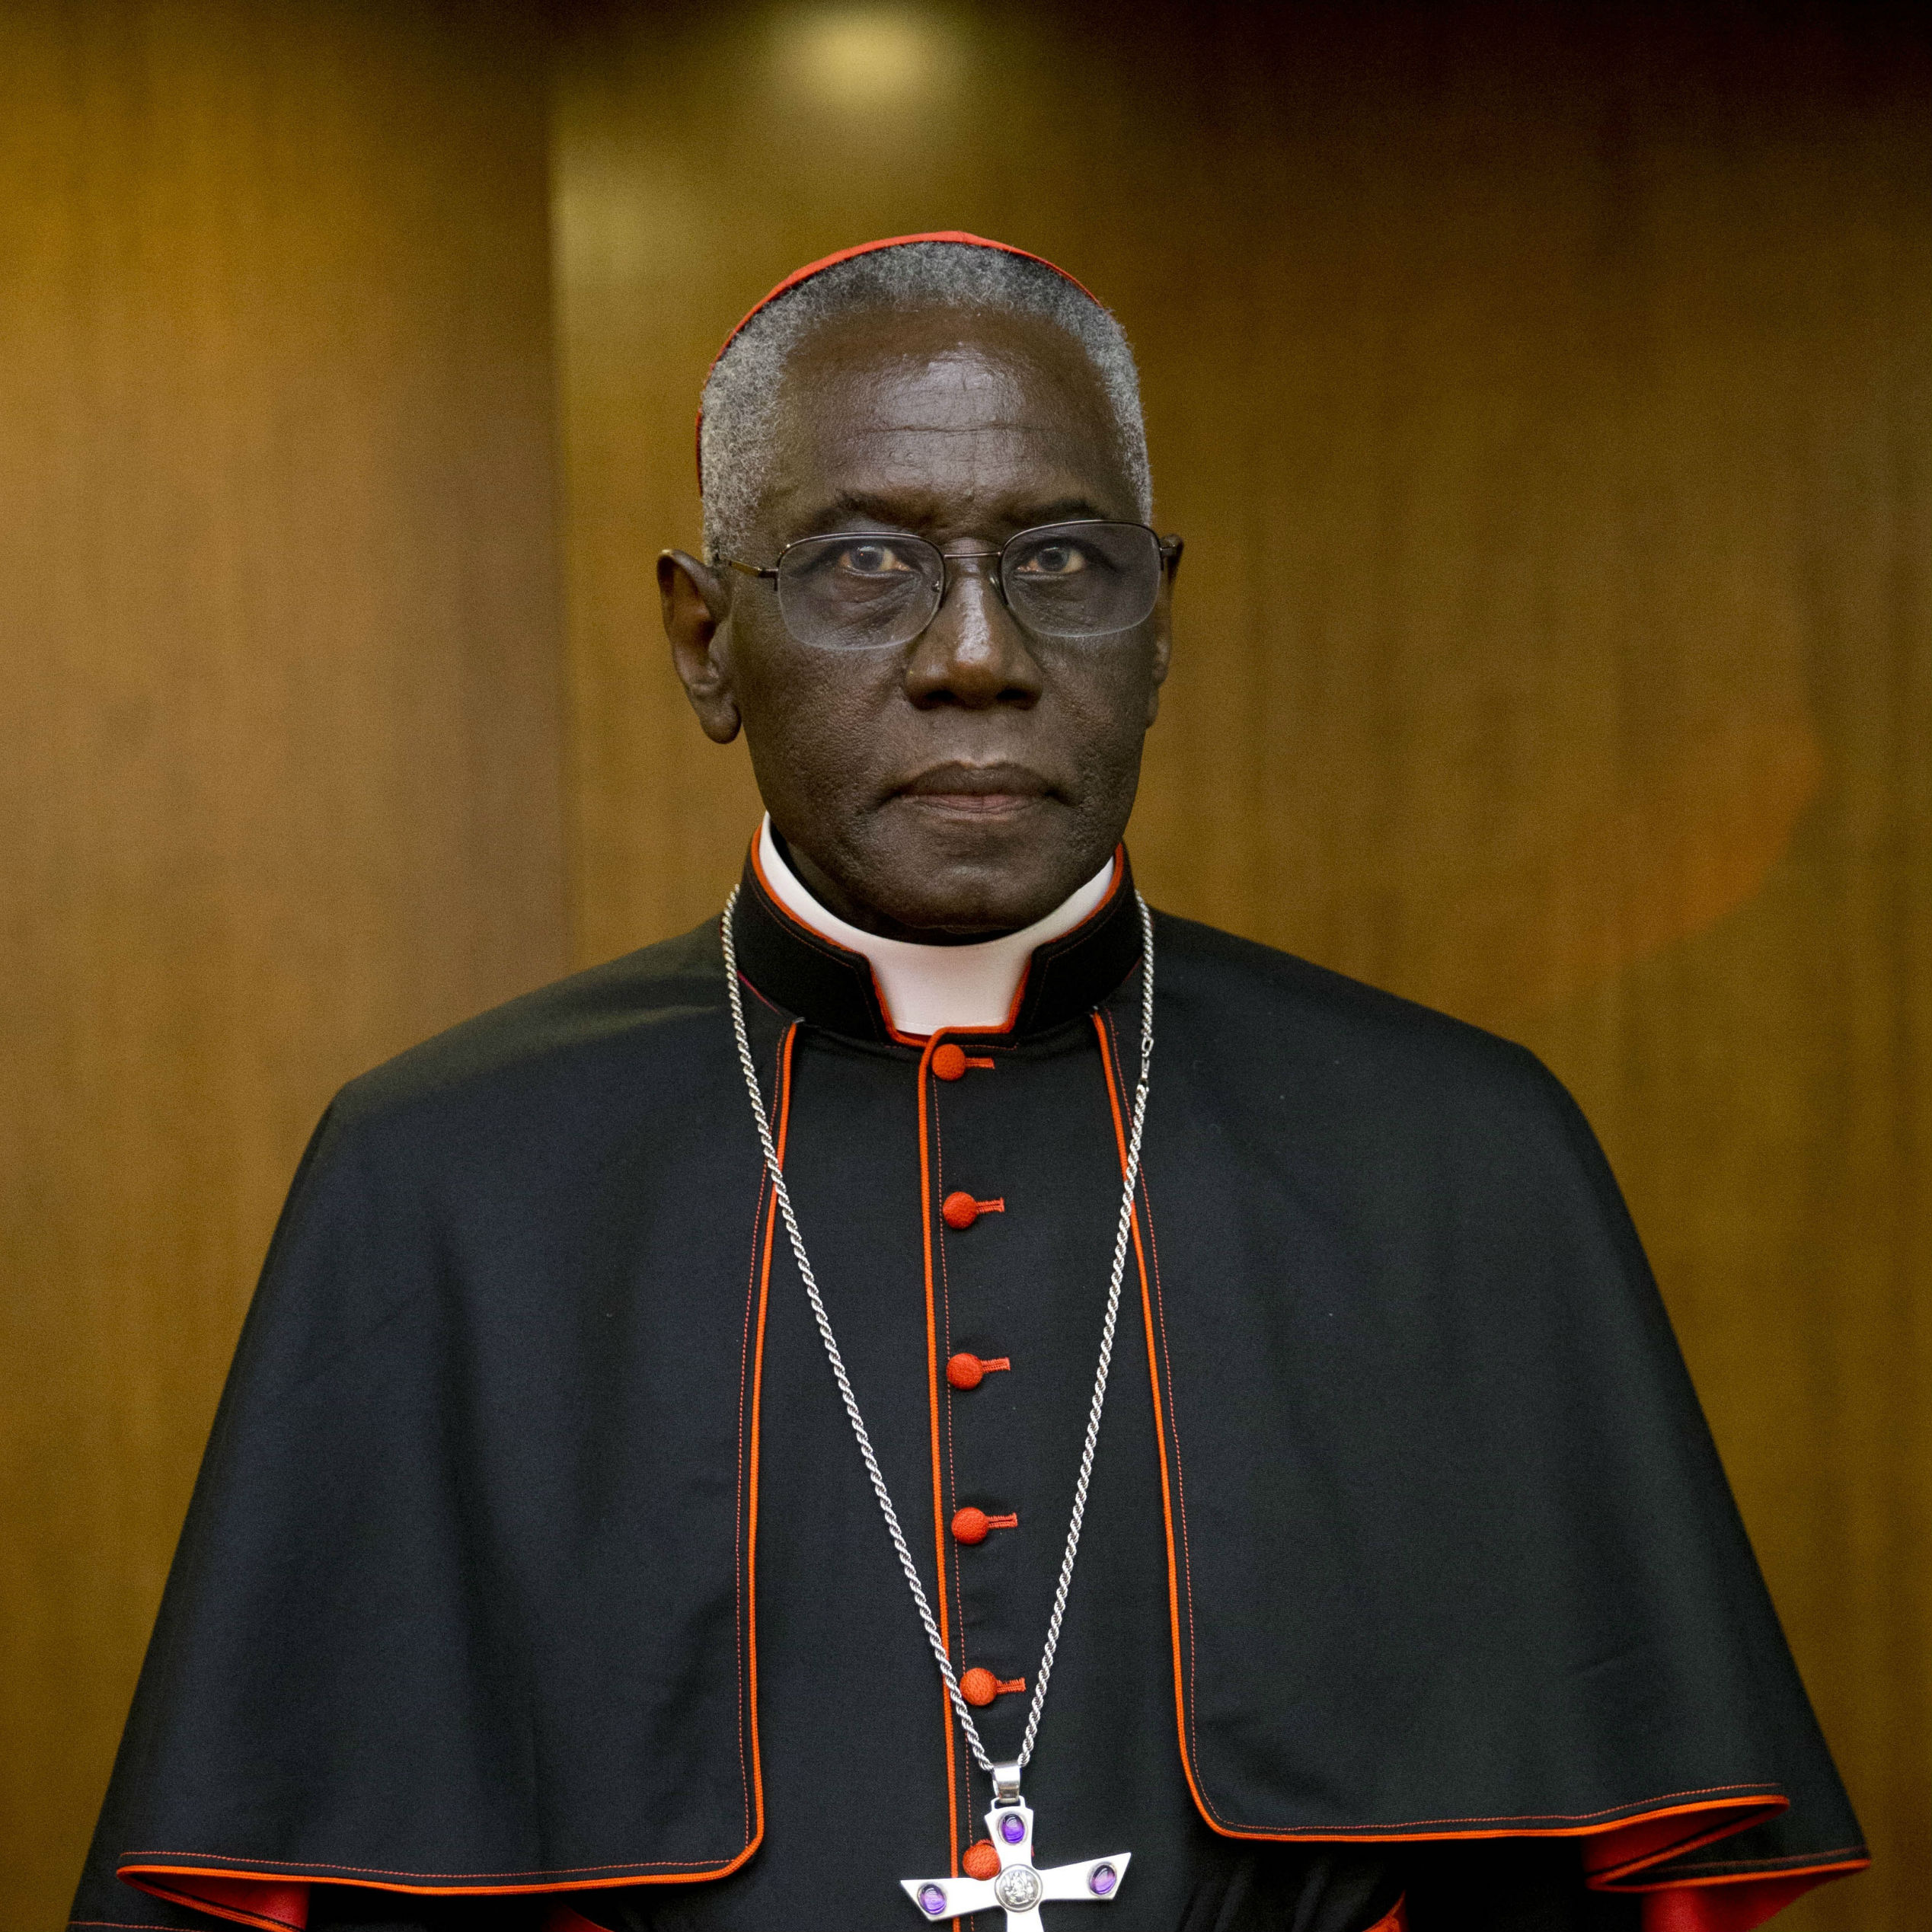 Cardinal Sarah reiterates ad orientem comments and urges priests to carry out 'liturgical examination of conscience'